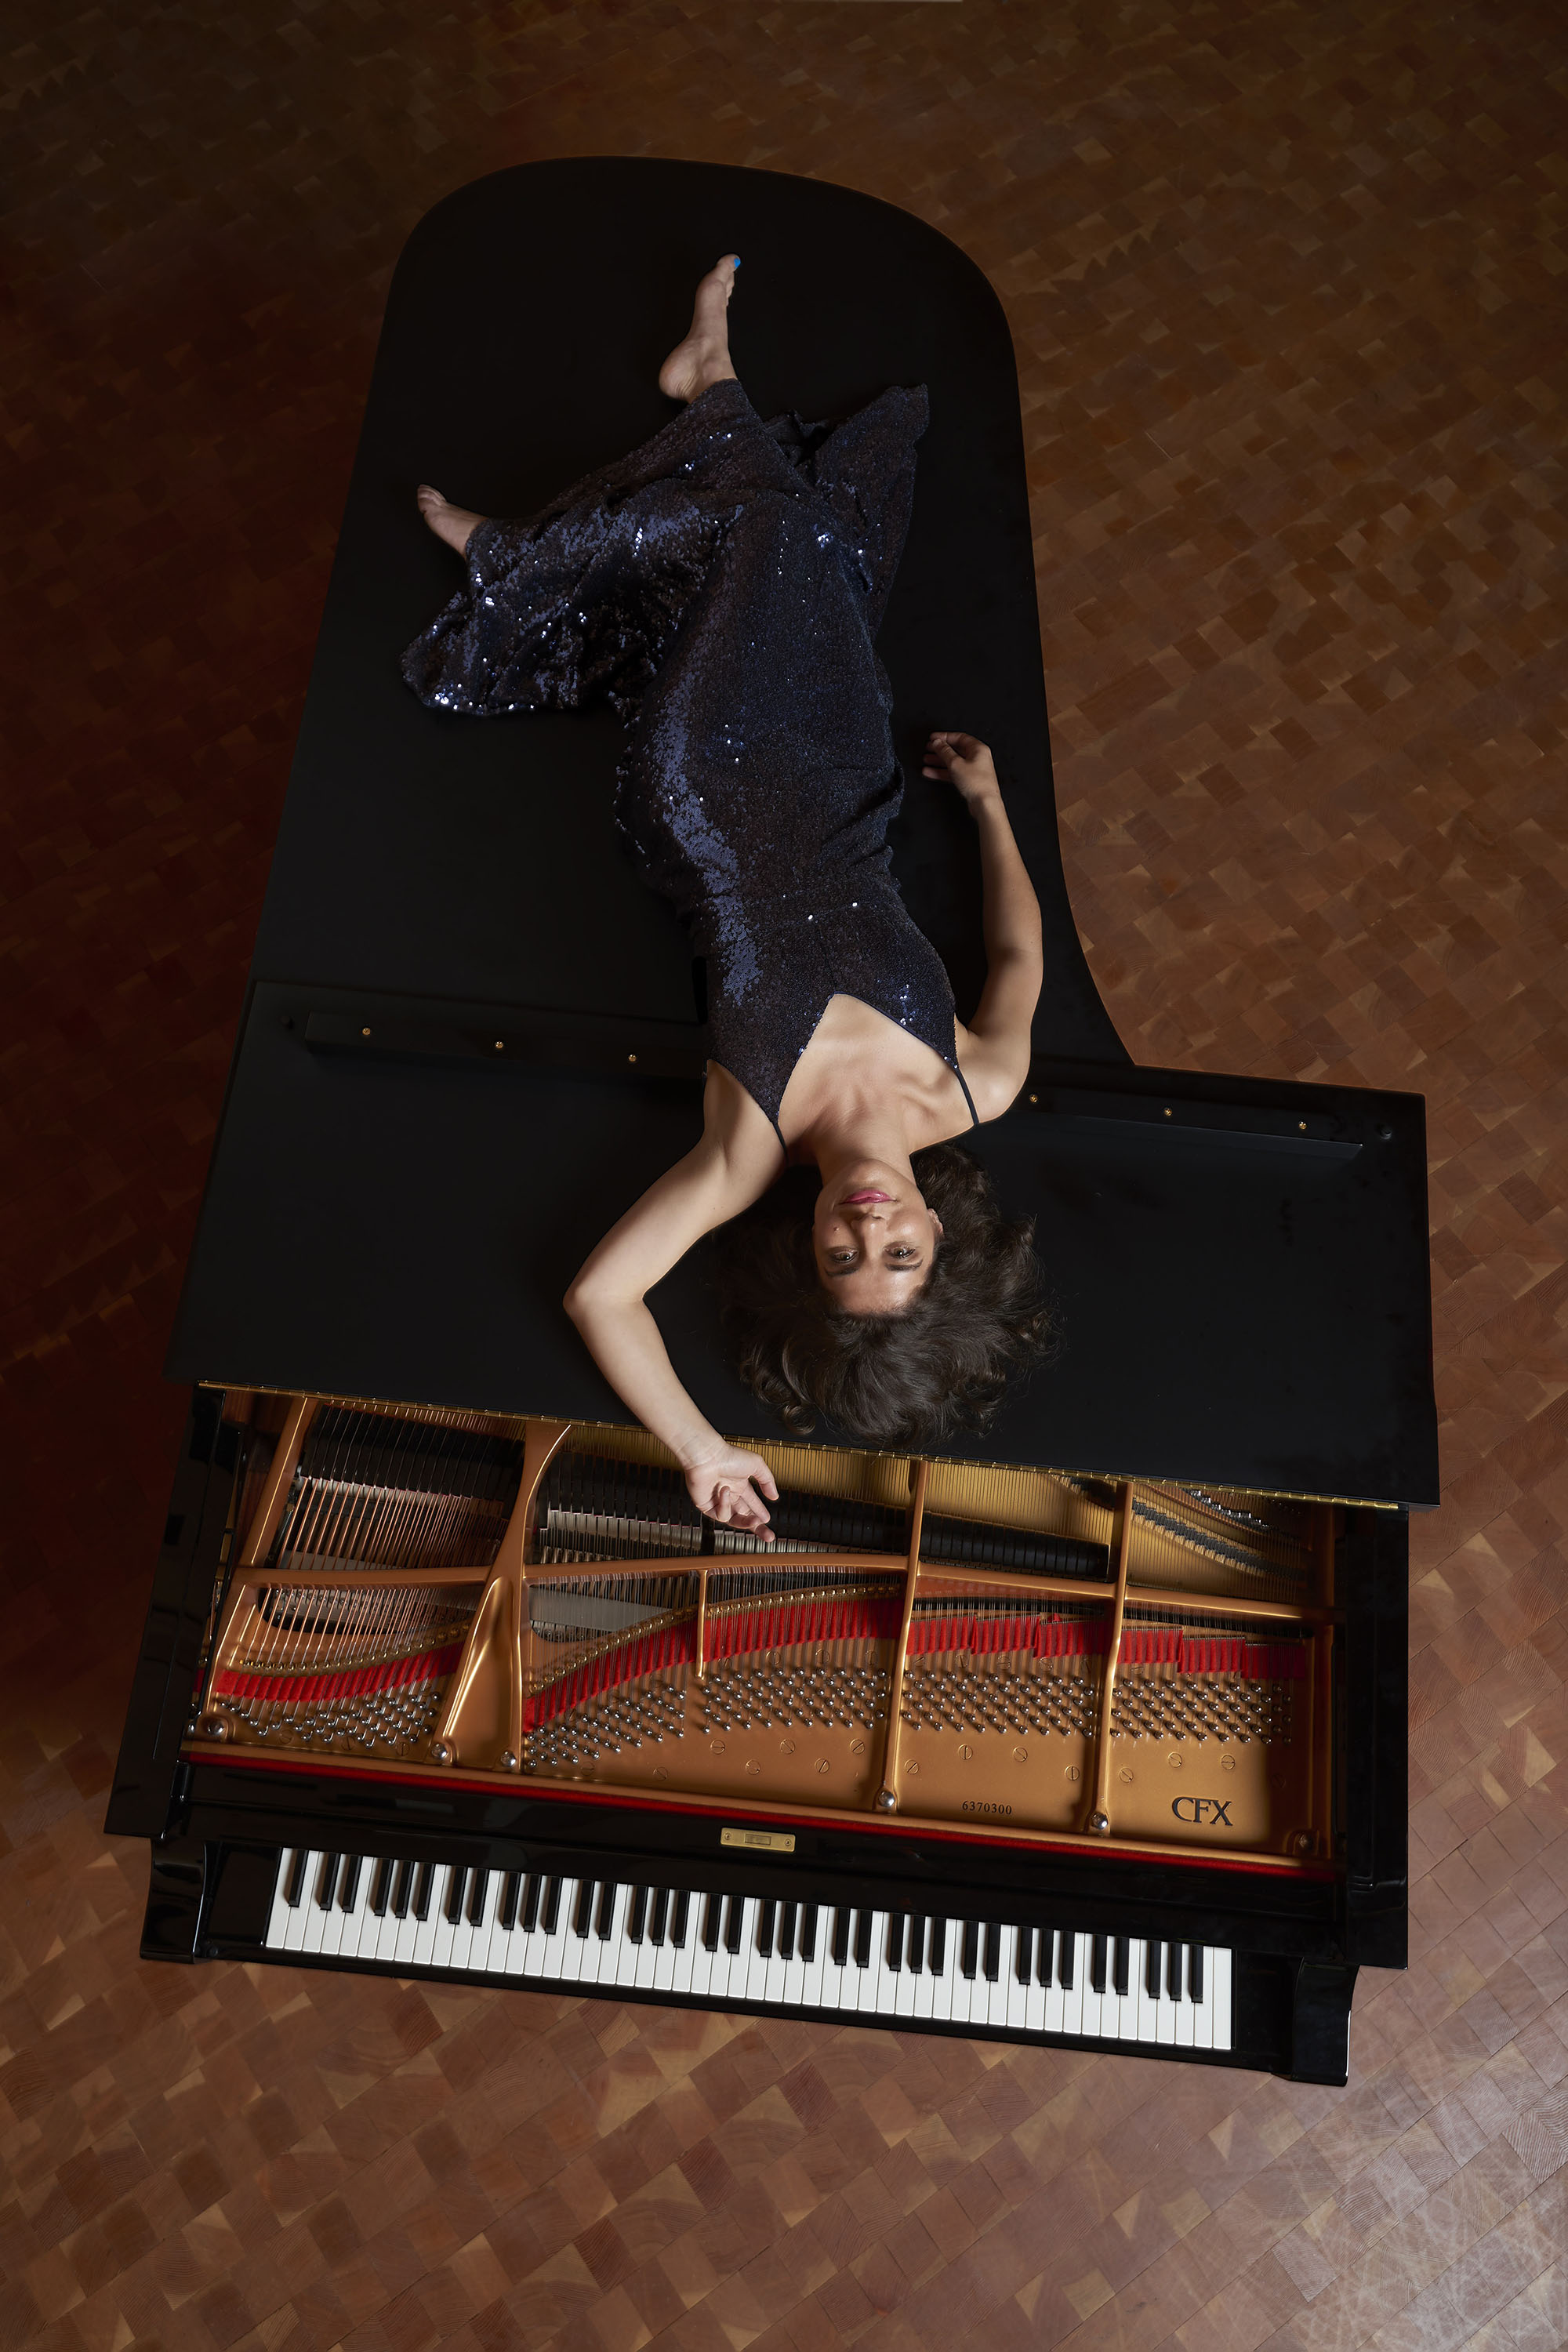 upside-down view from overhead: Inna Faliks in a dark sequined dress, laying on top of a Yamaha grand piano, smiling